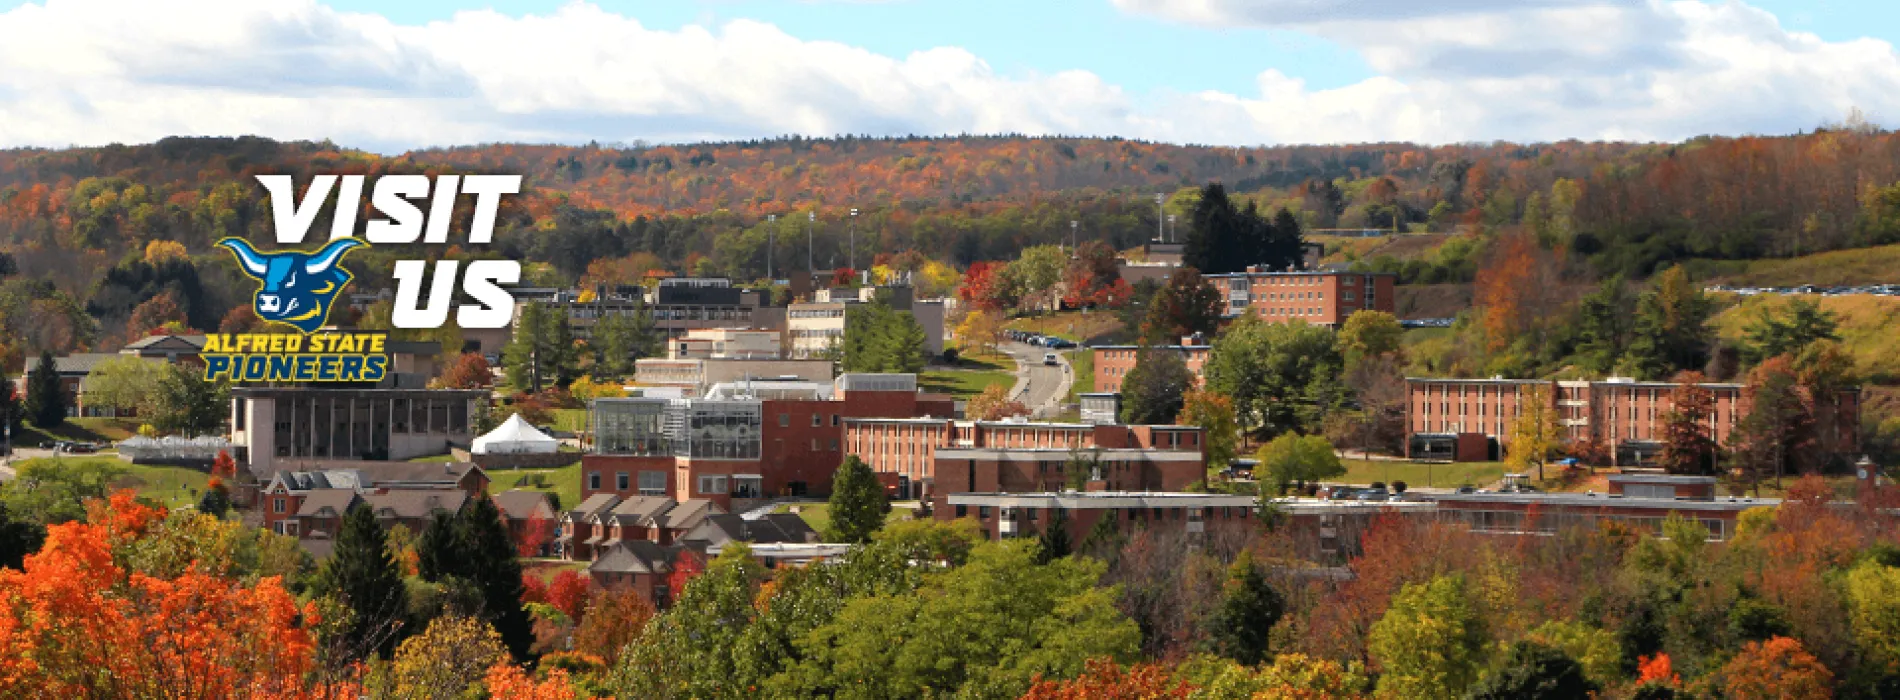 View of Alfred State campus rolling hills and fall leaves from afar. Alfred State Pioneers Ox mascot and words Visit us.